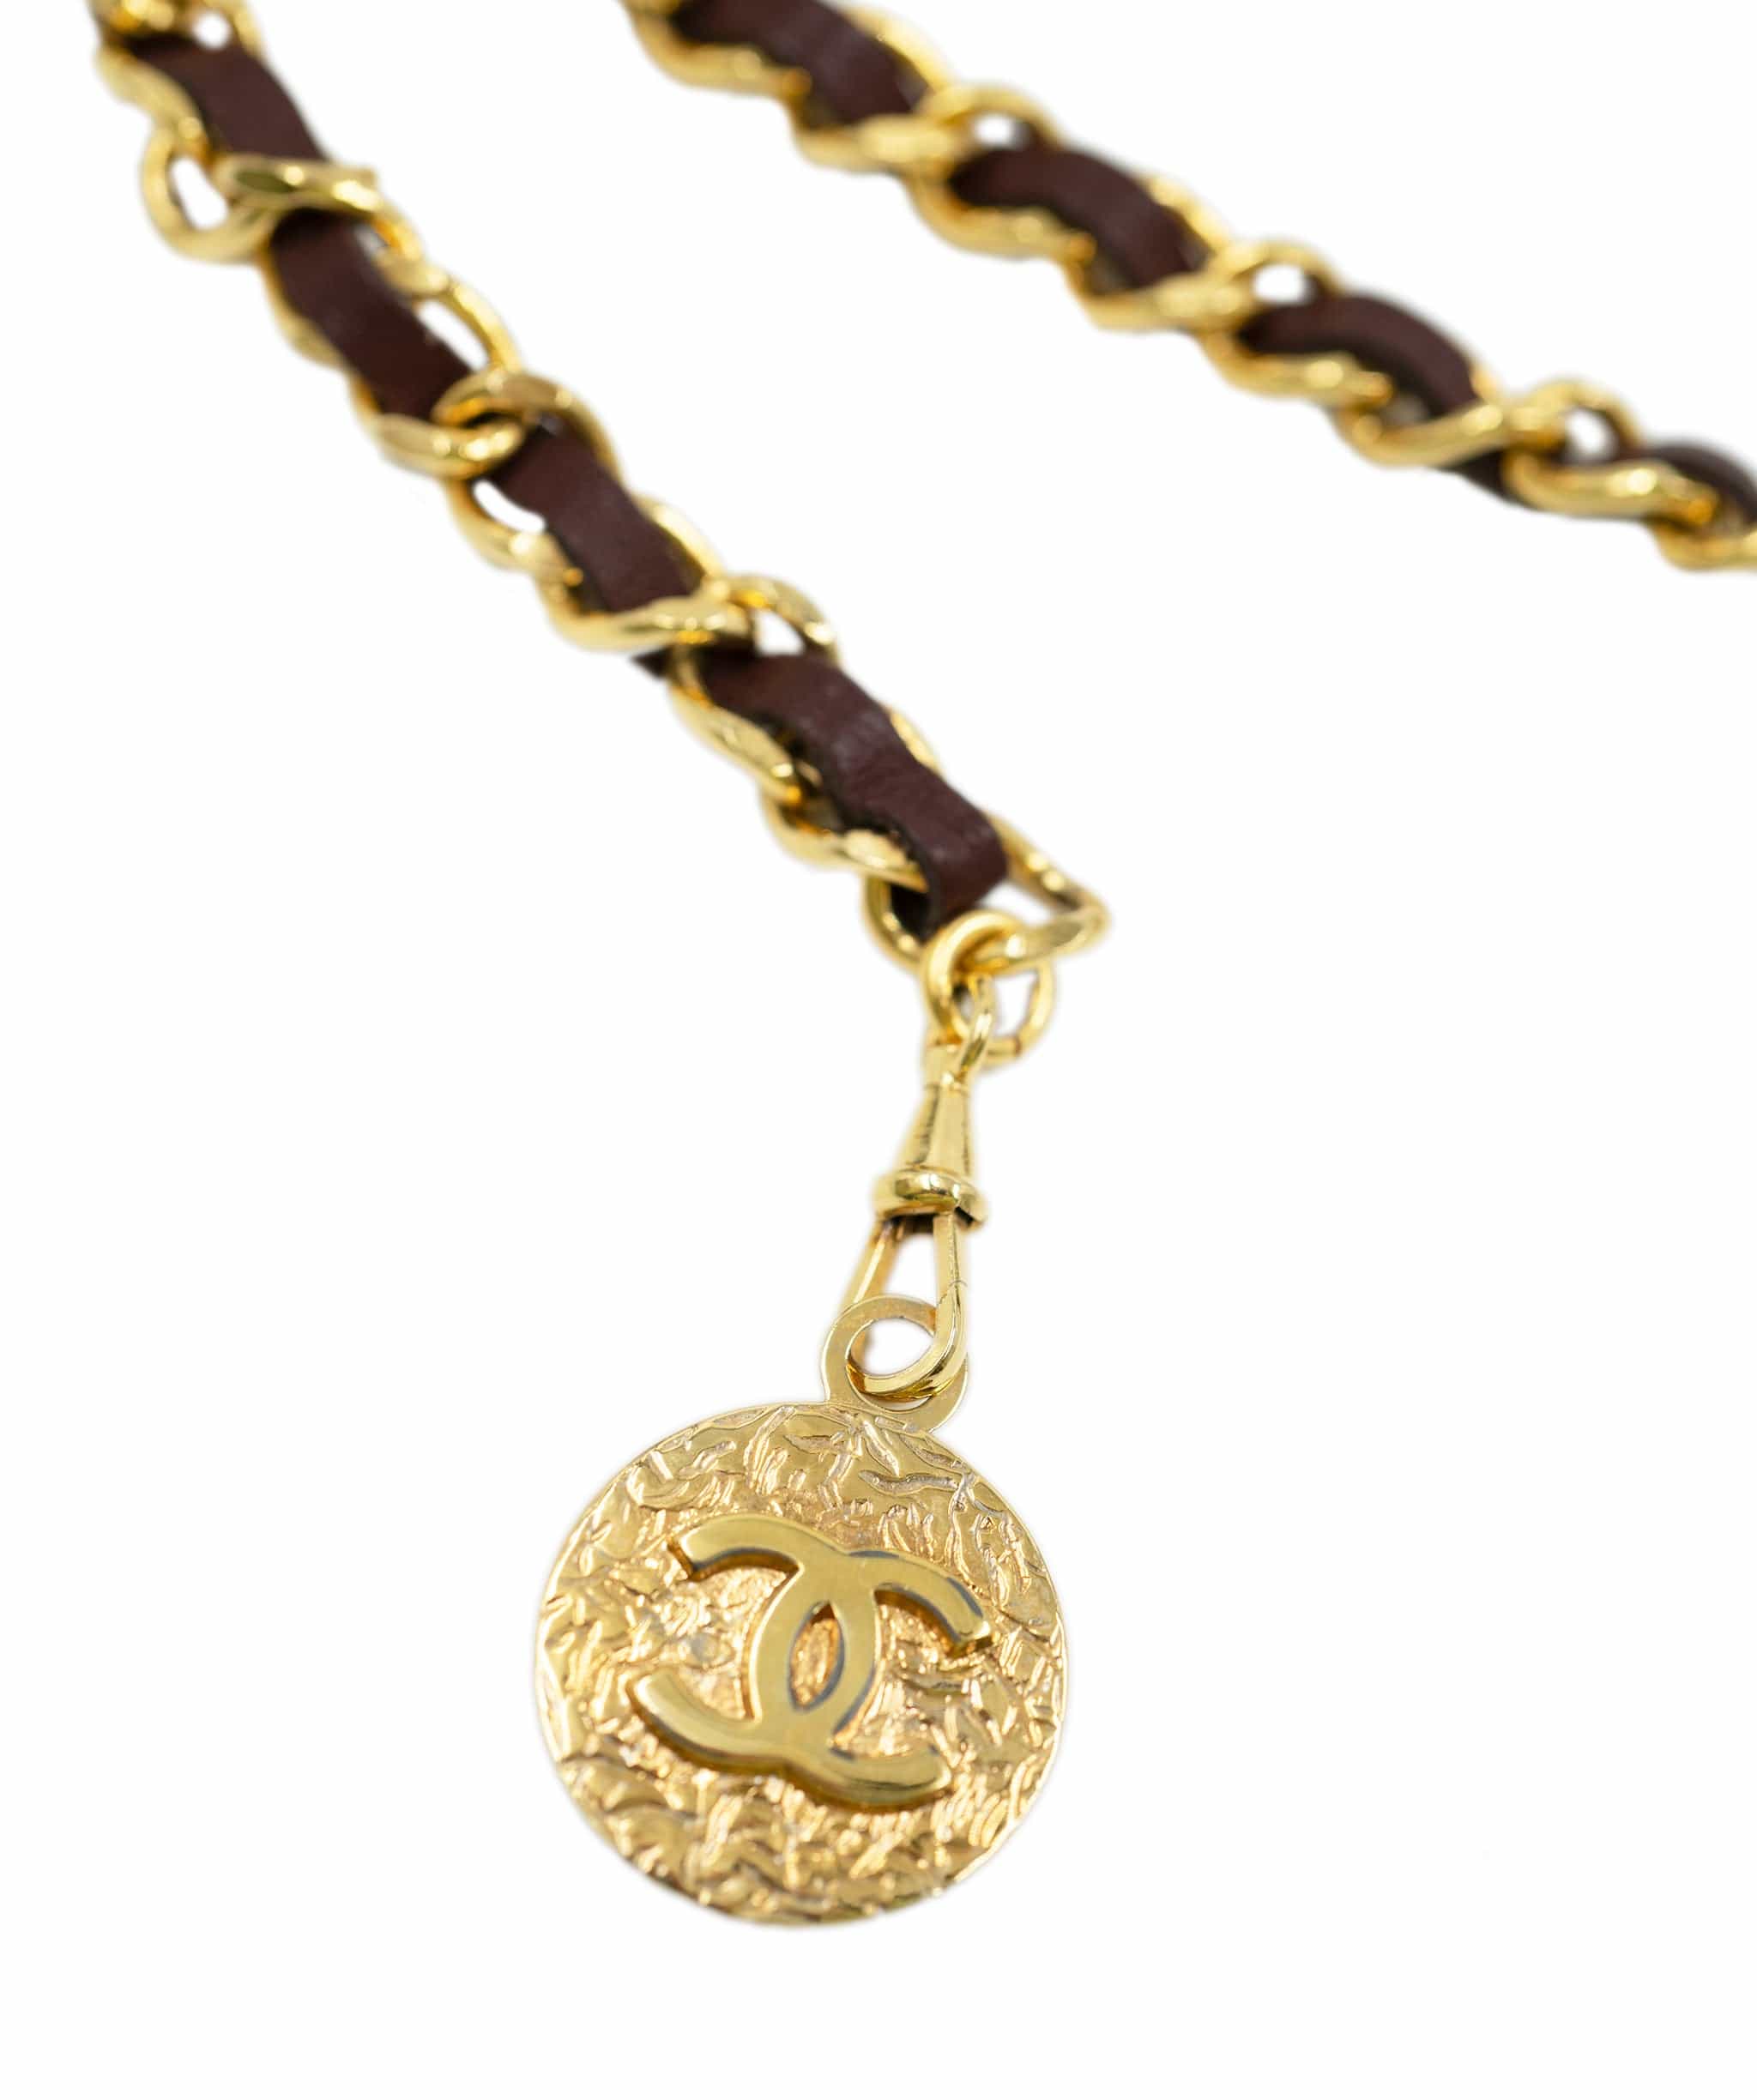 Chanel Vintage Chanel Gold & Leather Chain Belt - AWL2280